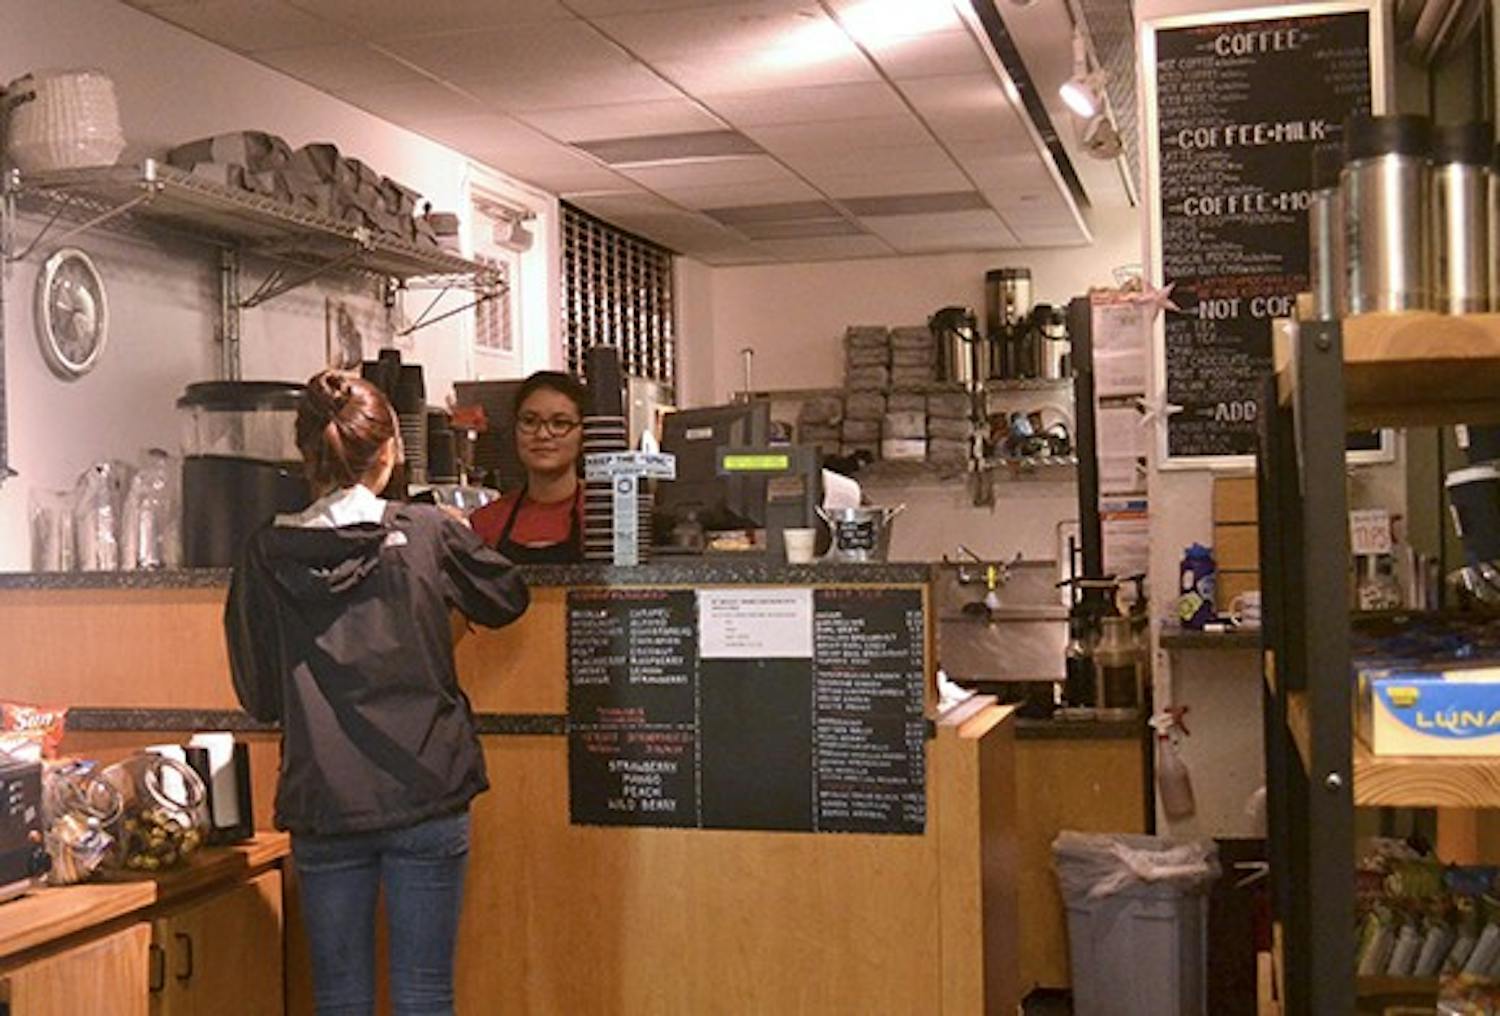 Stephanie Kim, a sophomore student, buys coffee from barista Mariko Davison at the Daily Grind located in the student store.